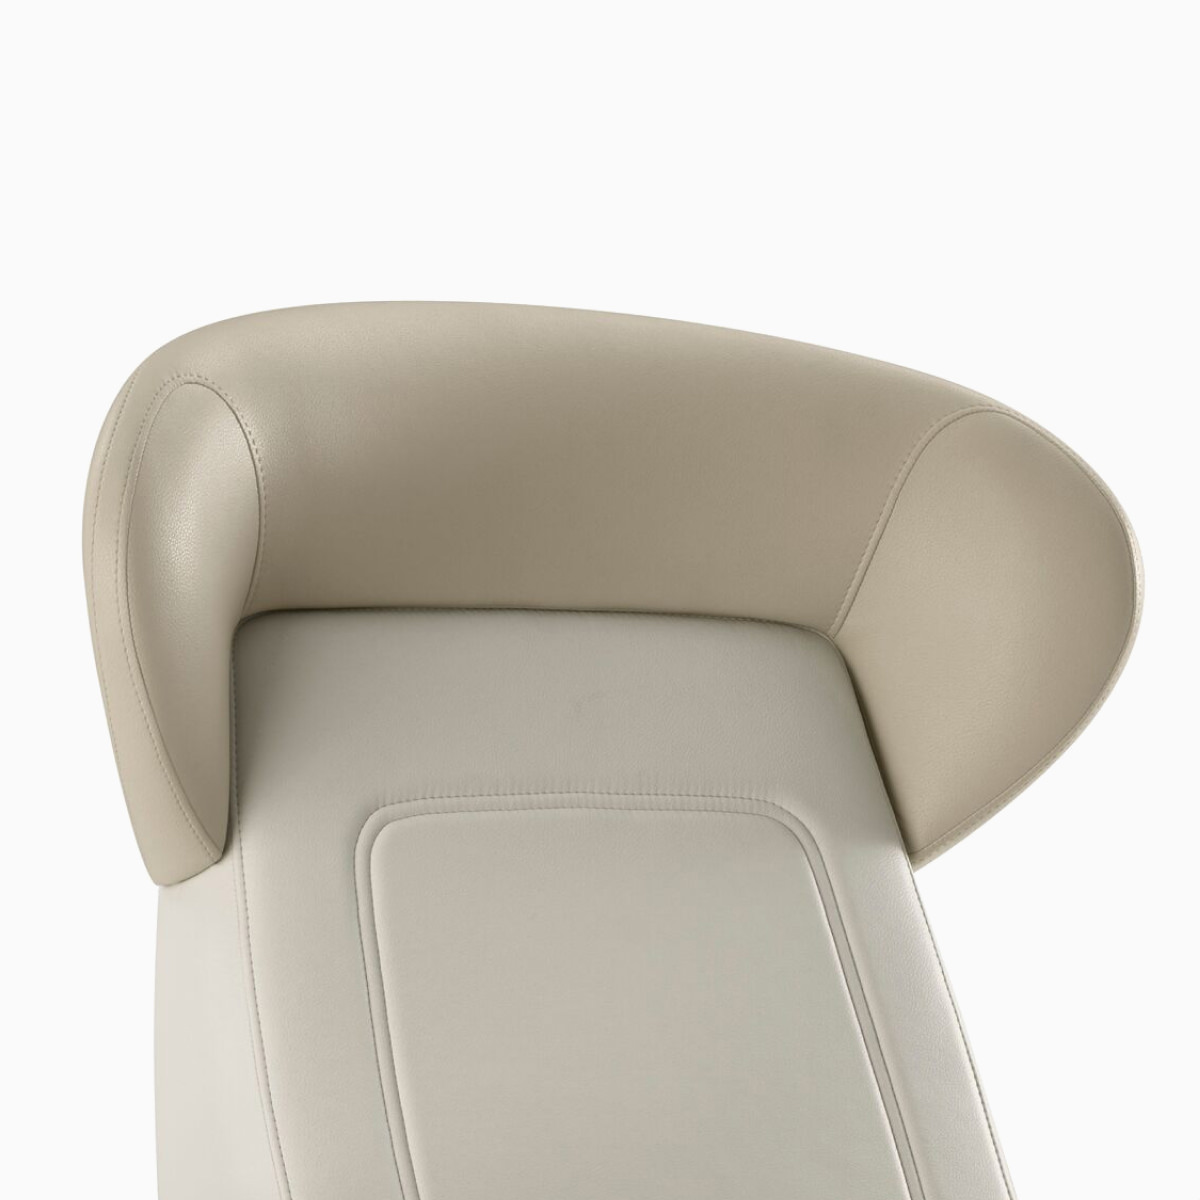 Detail of the wingback style back on Nemschoff Ava Recliner.